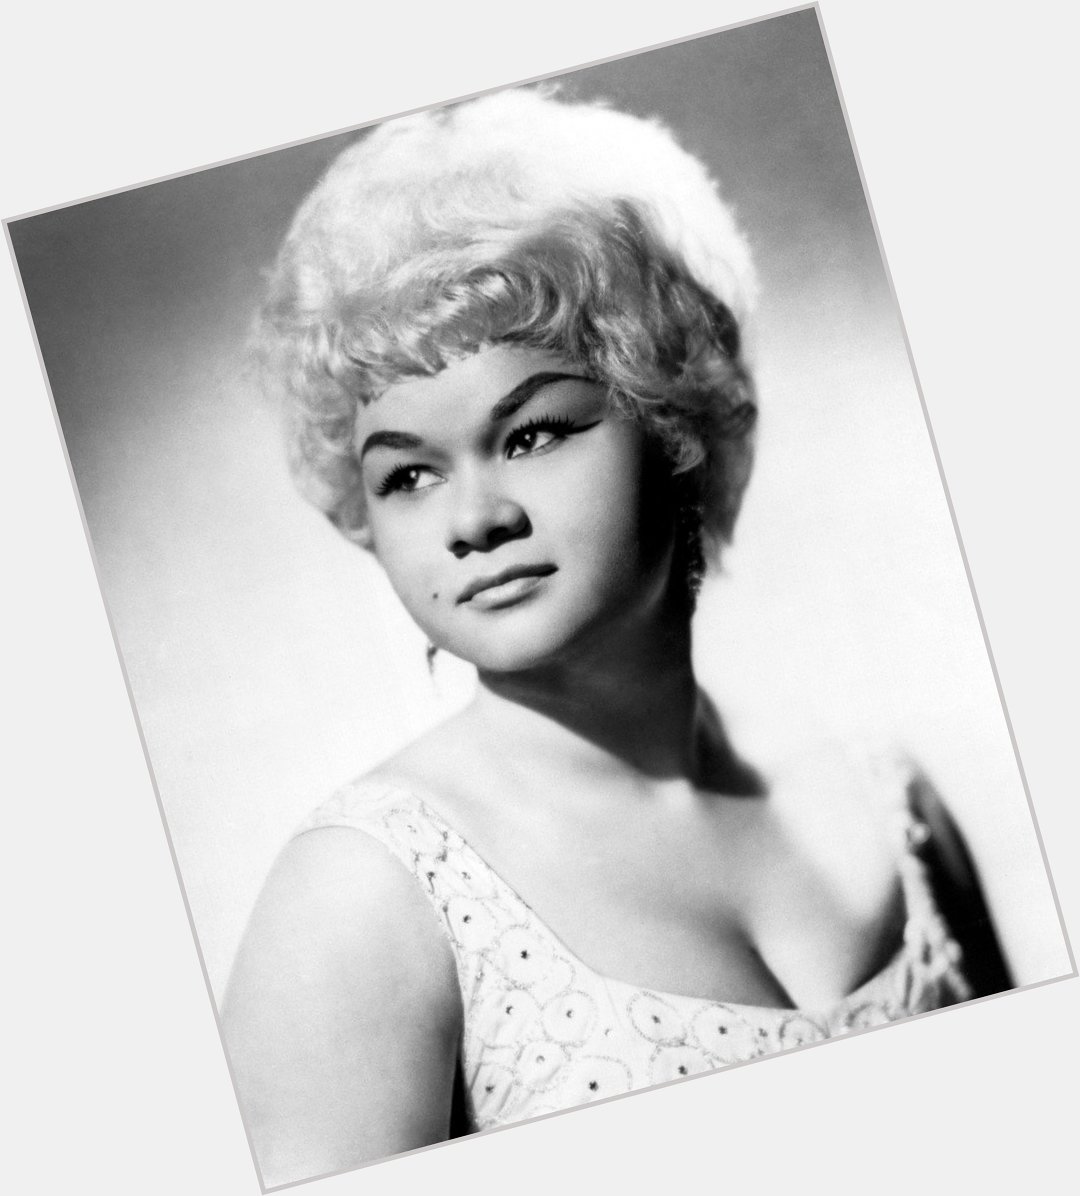 And a happy remembrance birthday to the great Etta James 